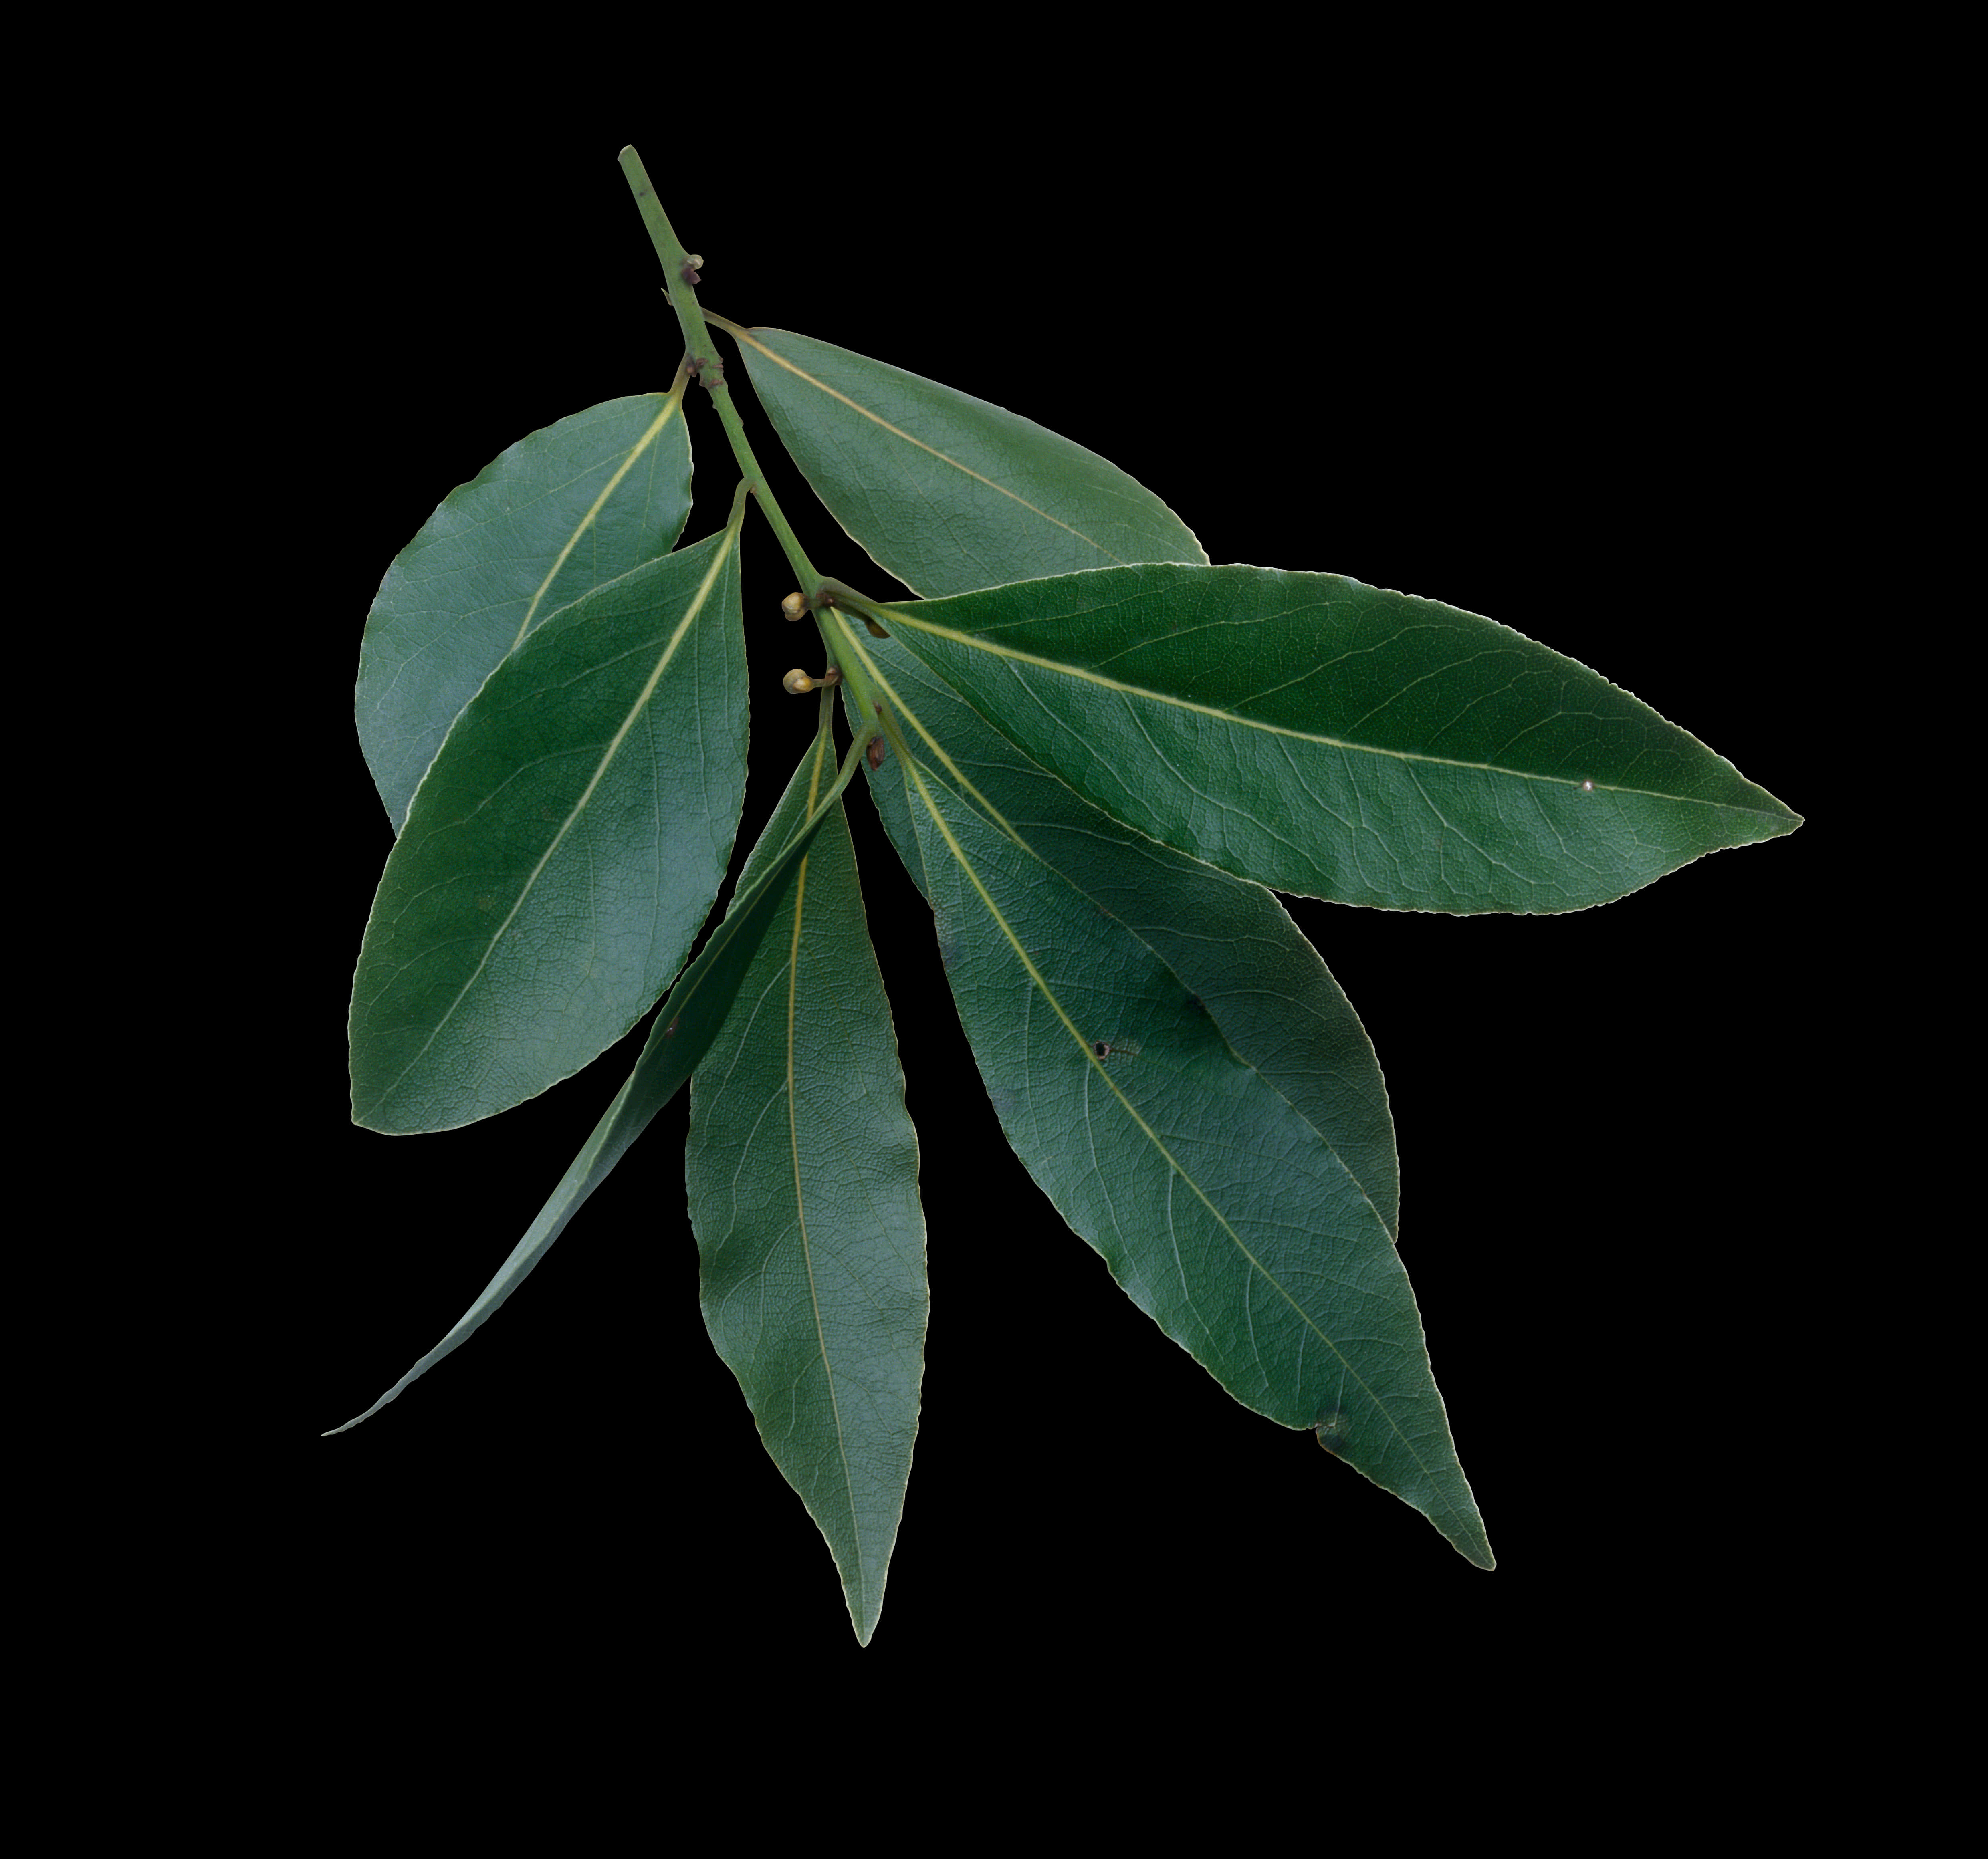 A Green Leafy Plant On A Black Background